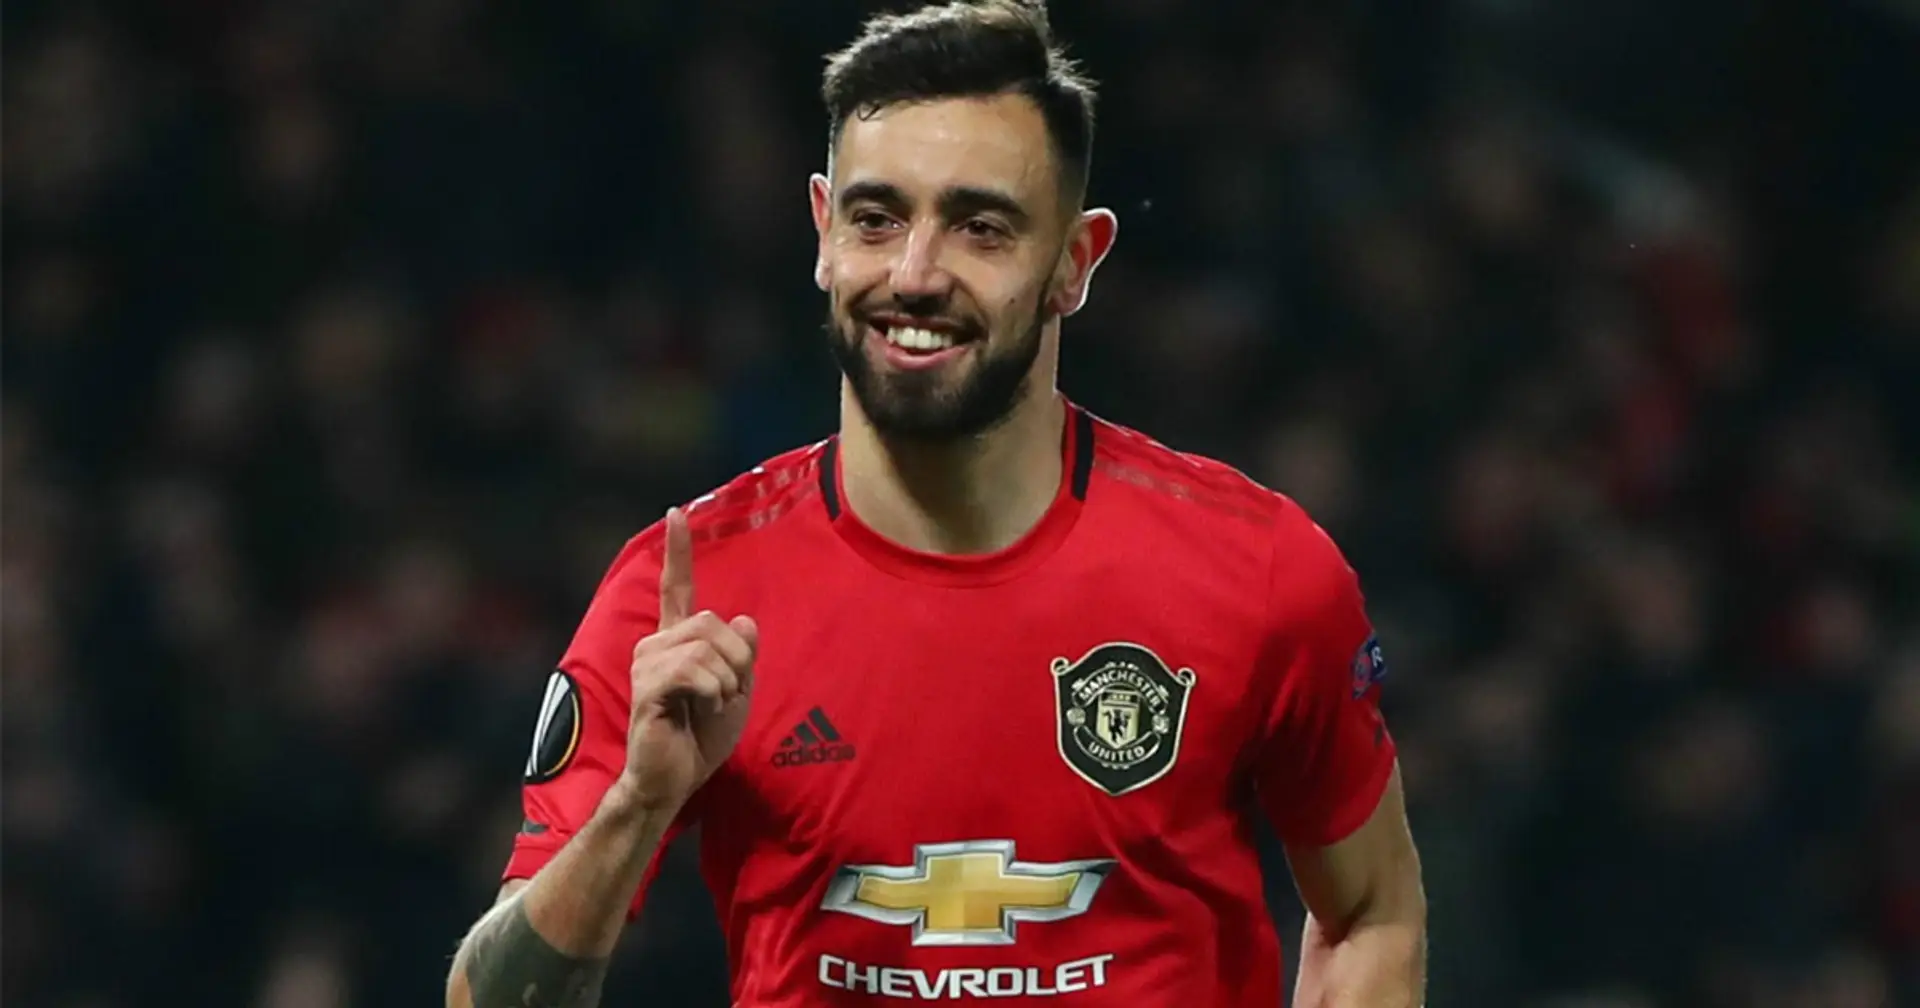 What do you know about Man United star Bruno Fernandes? Take our quiz and find out